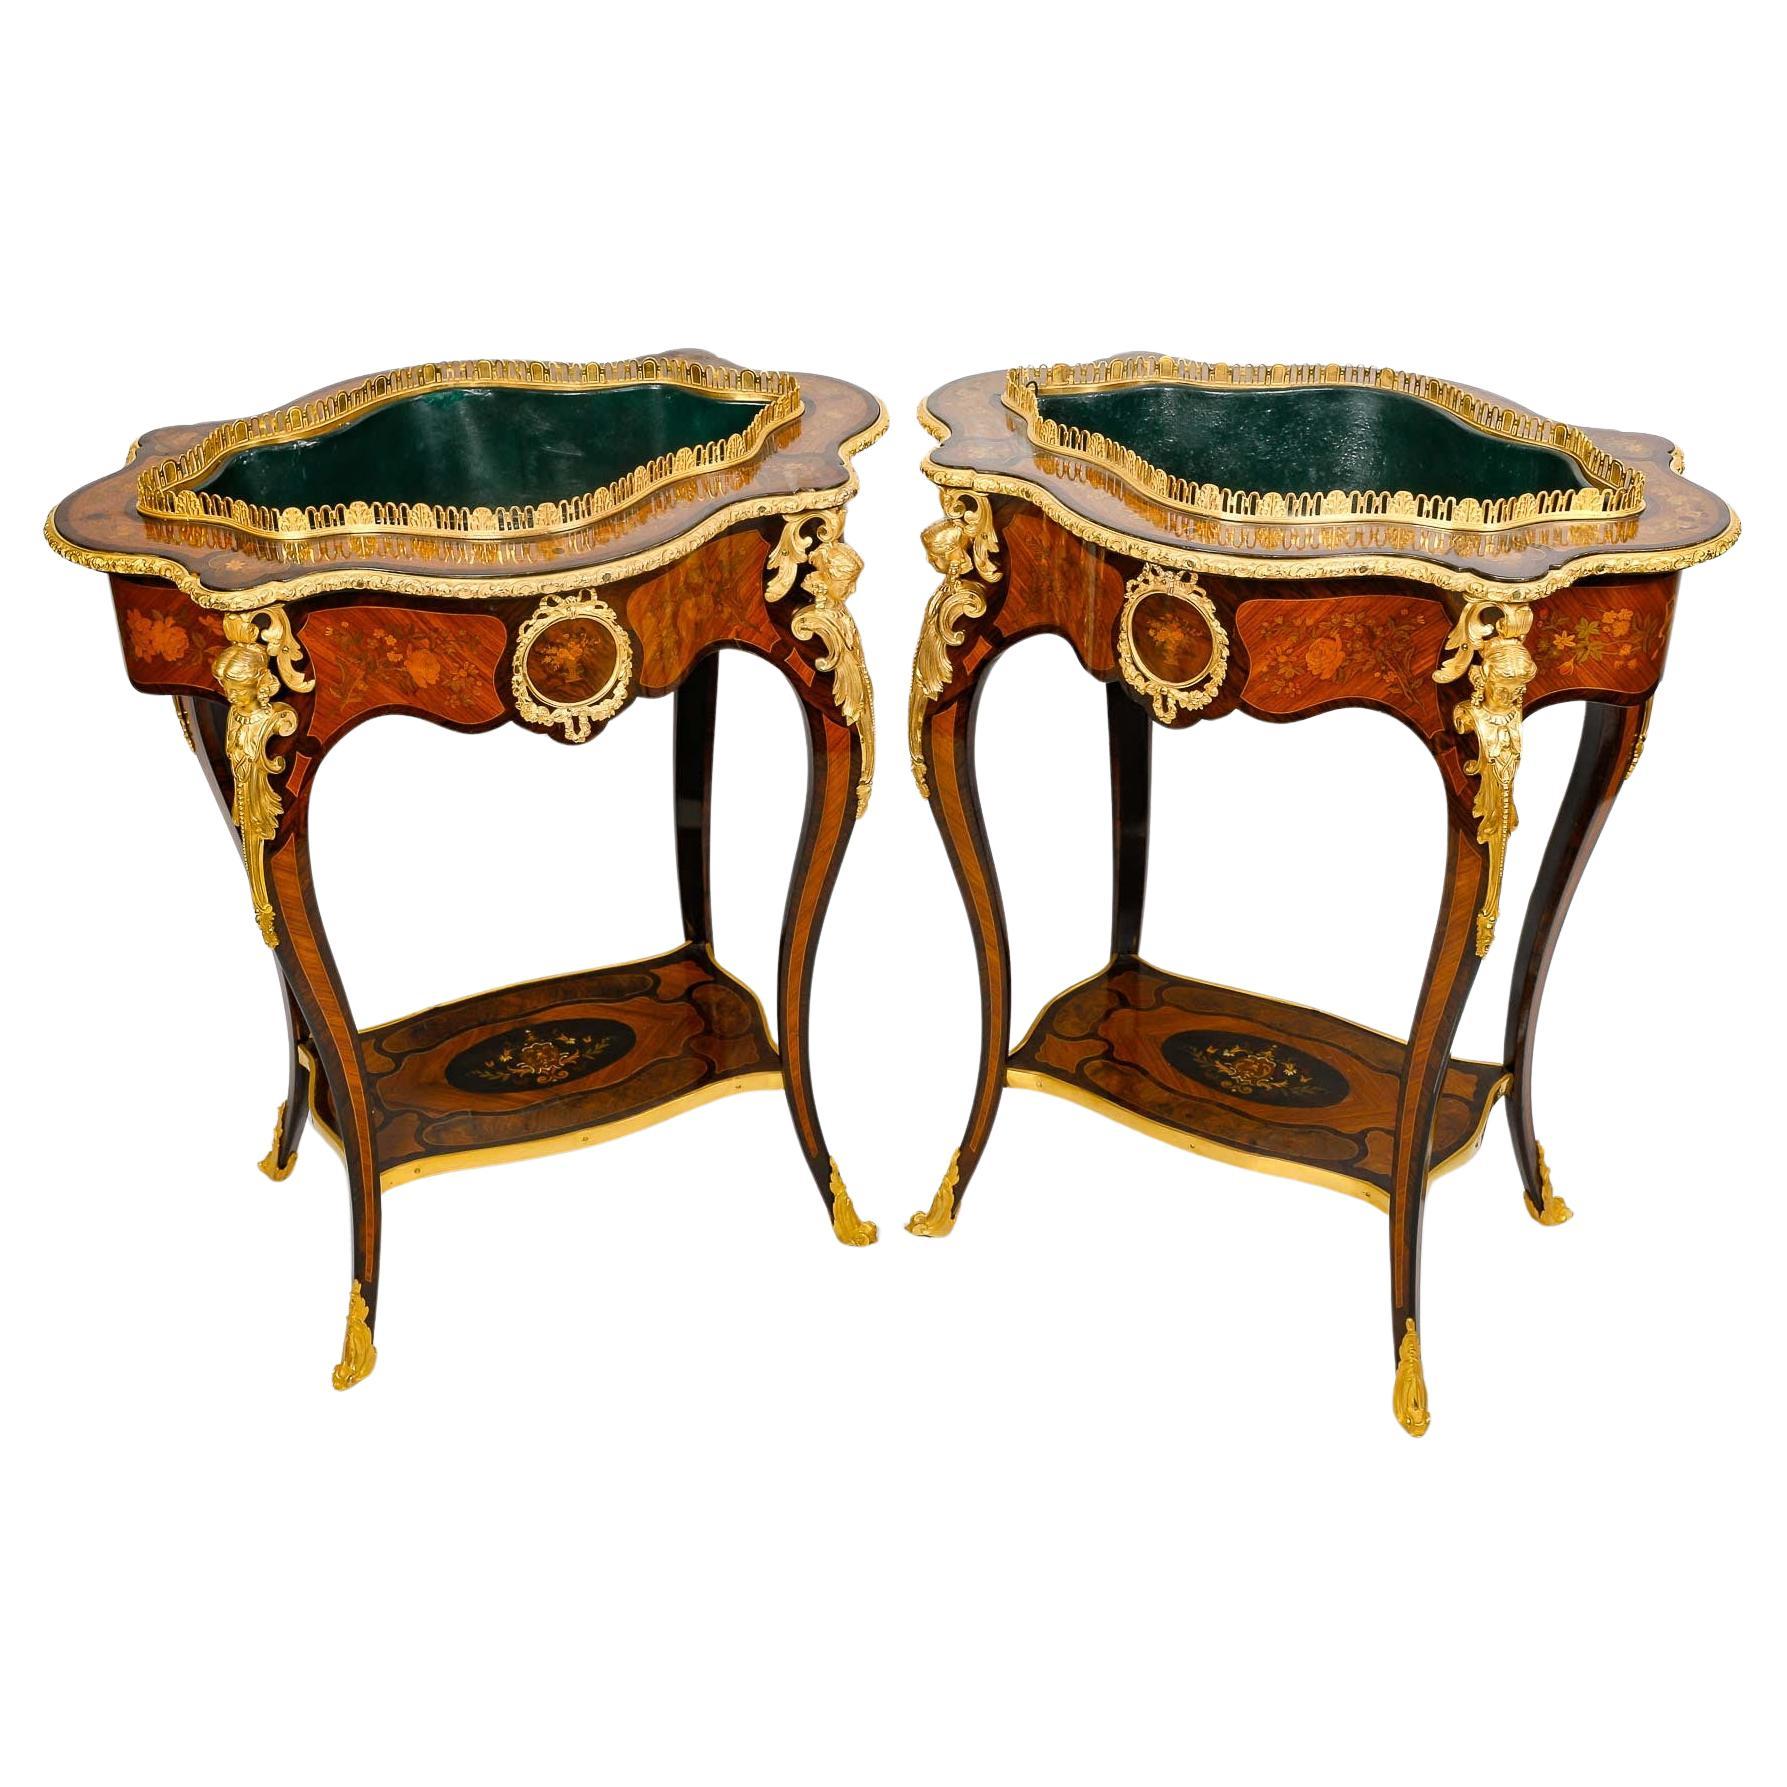 Pair of Precious Wood Marquetry and Gilt Bronze Planters, 19th Century. For Sale